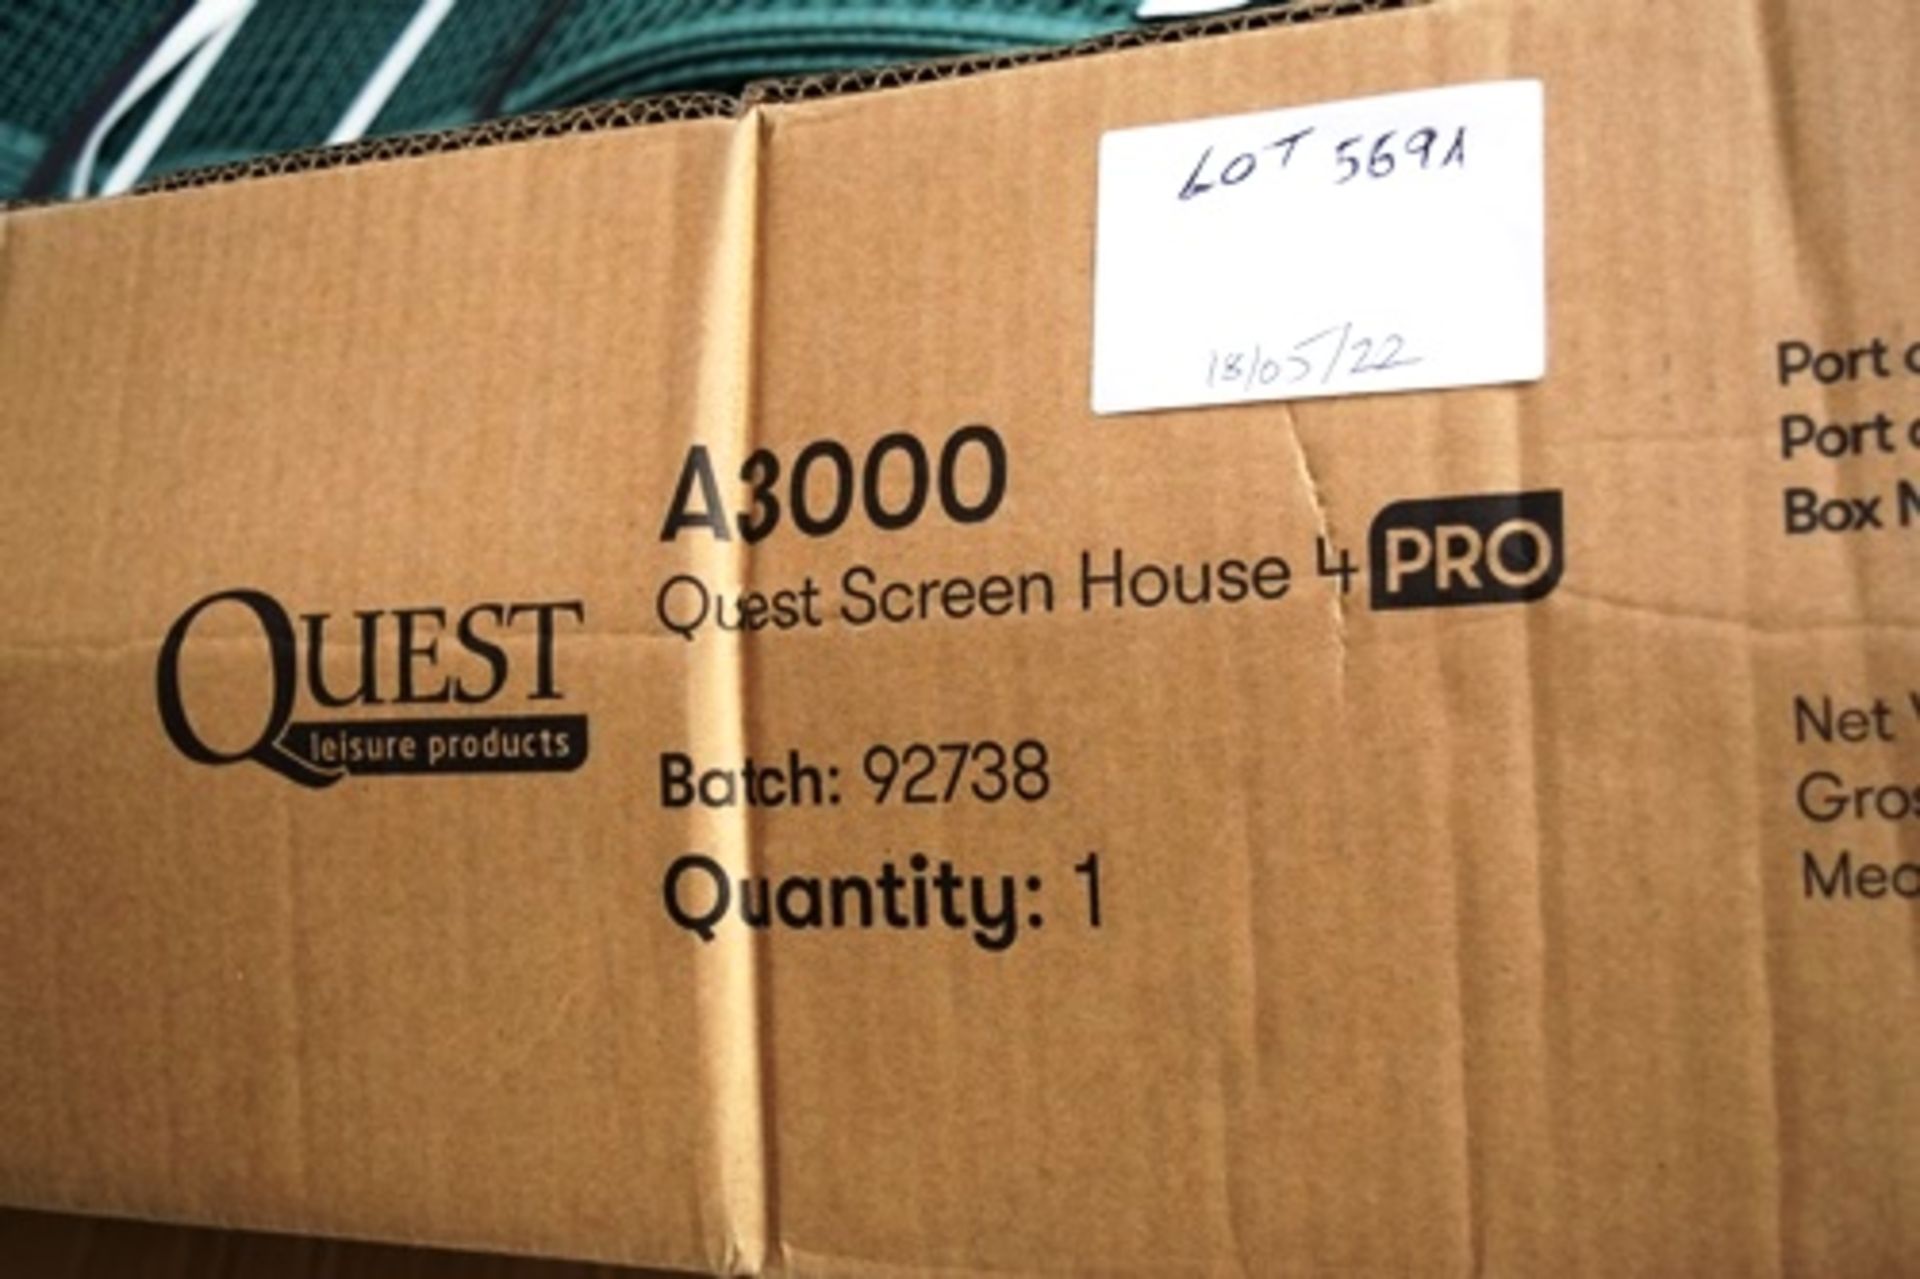 1 z Quest A3000 screen house 4 pro pop up gazebo - new in box (GS20 end)